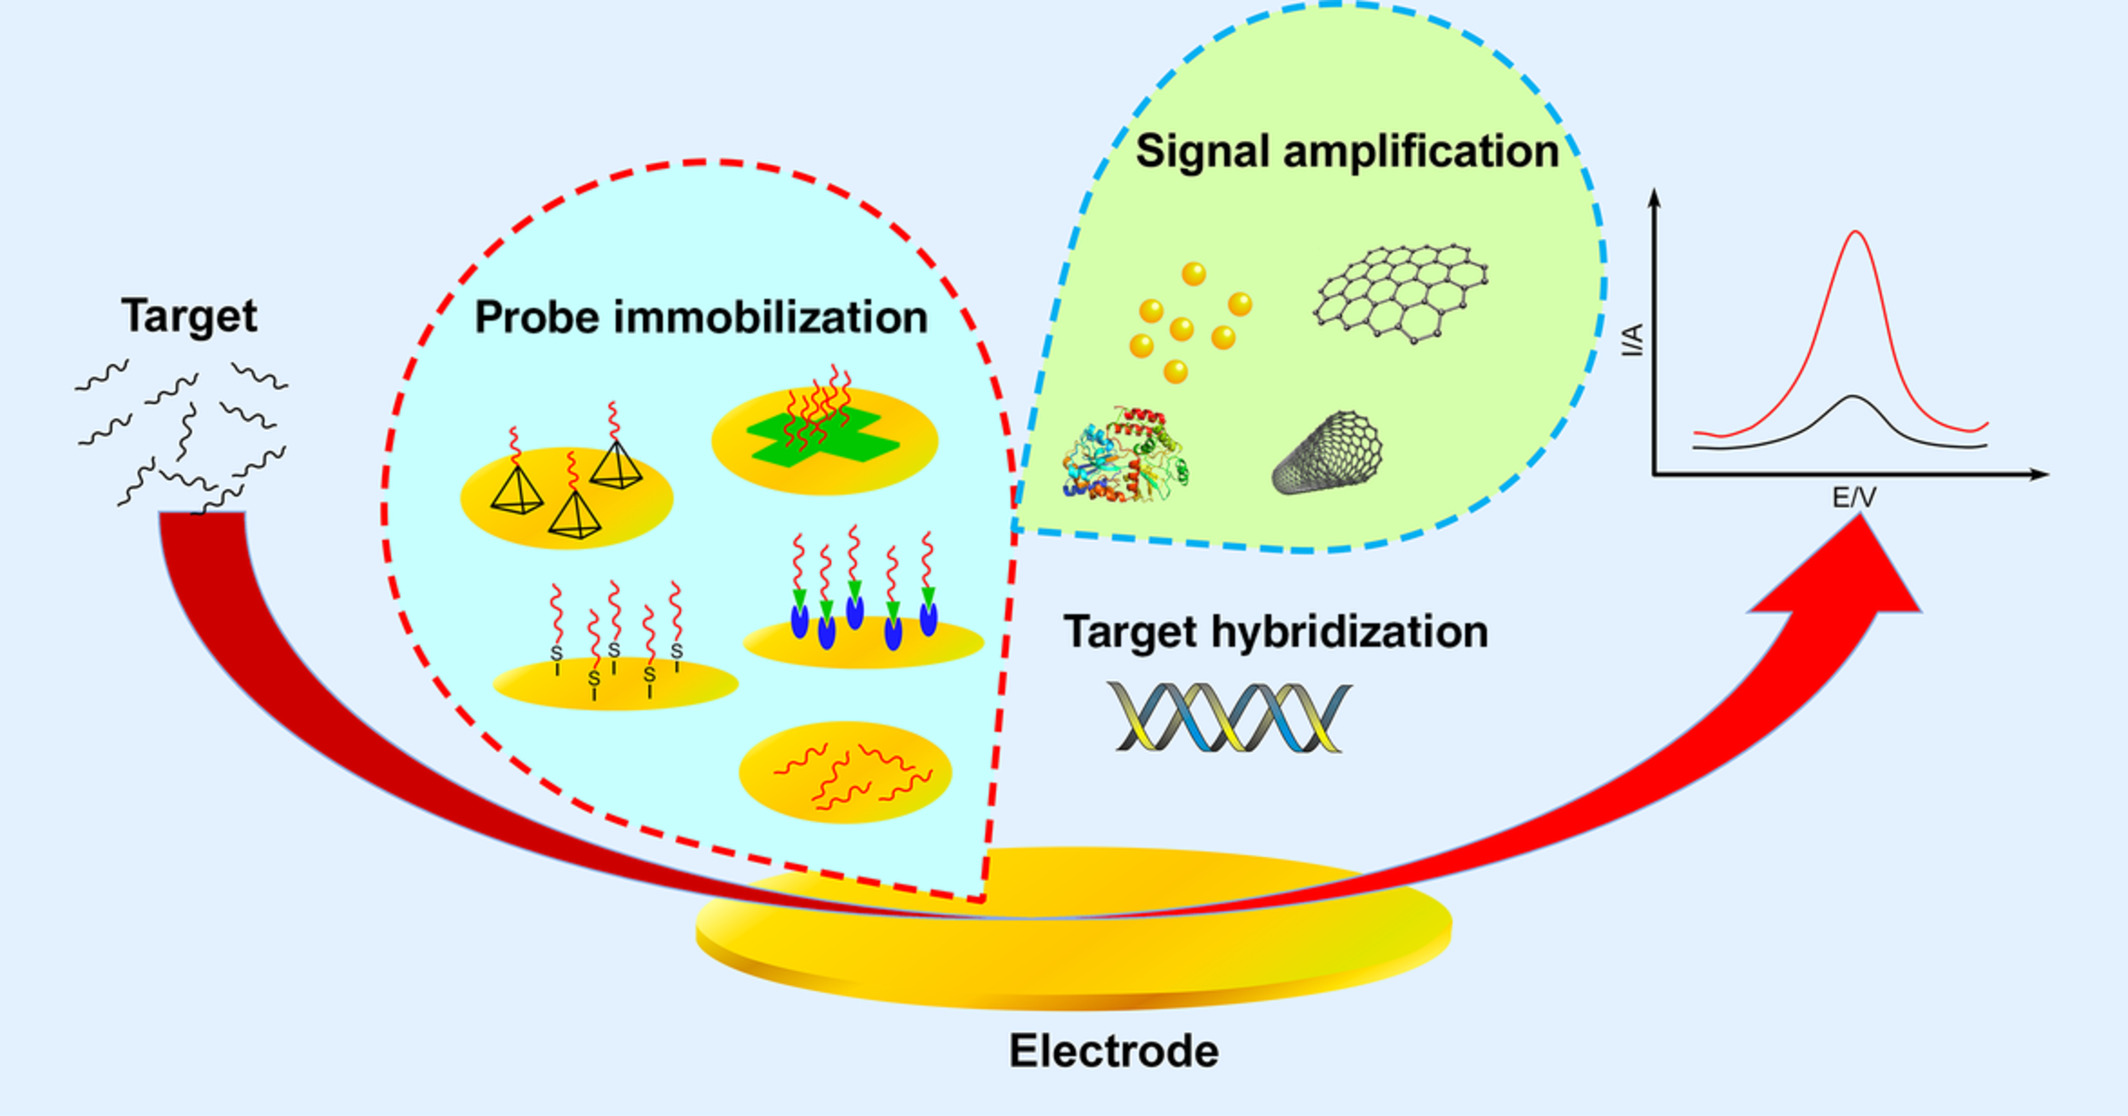 Nucleic acid‐based electrochemical biosensor: Recent advances in probe immobilization and signal amplification strategies